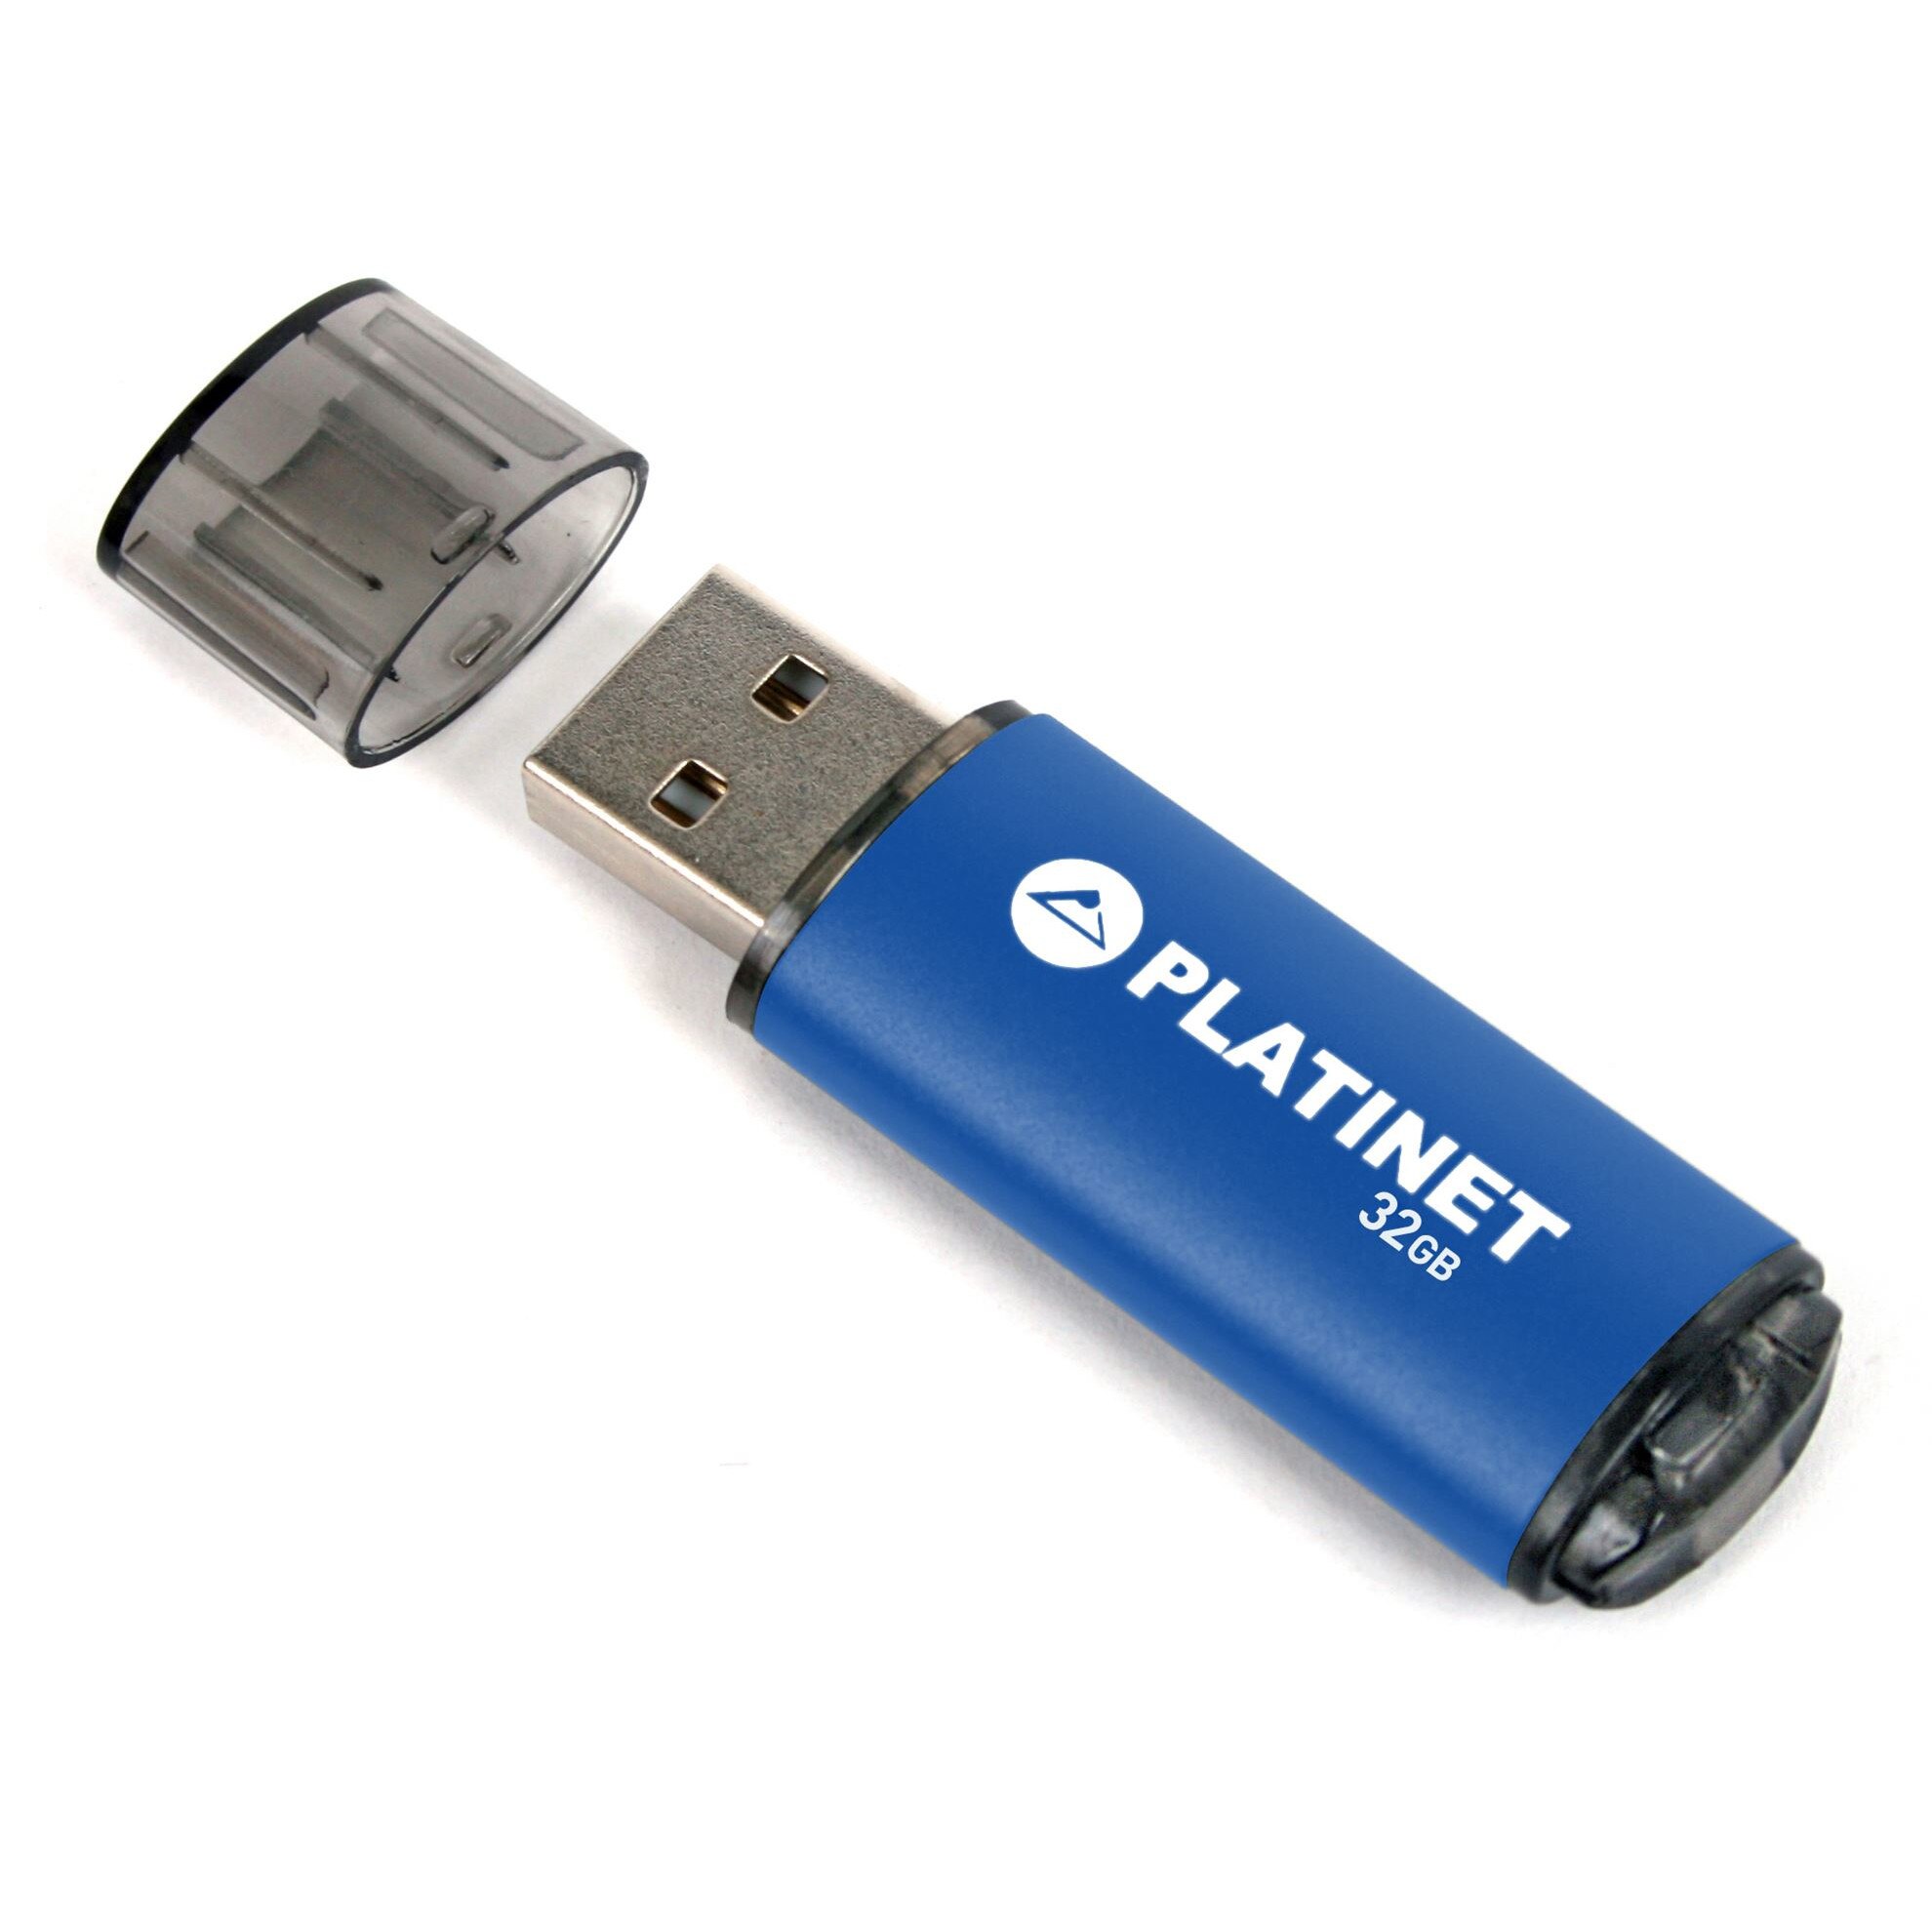 compliance Firefighter Learning Memorie USB 2.0 Platinet 32Gb, X-Depo 42967, cu capac, albastra - eMAG.ro